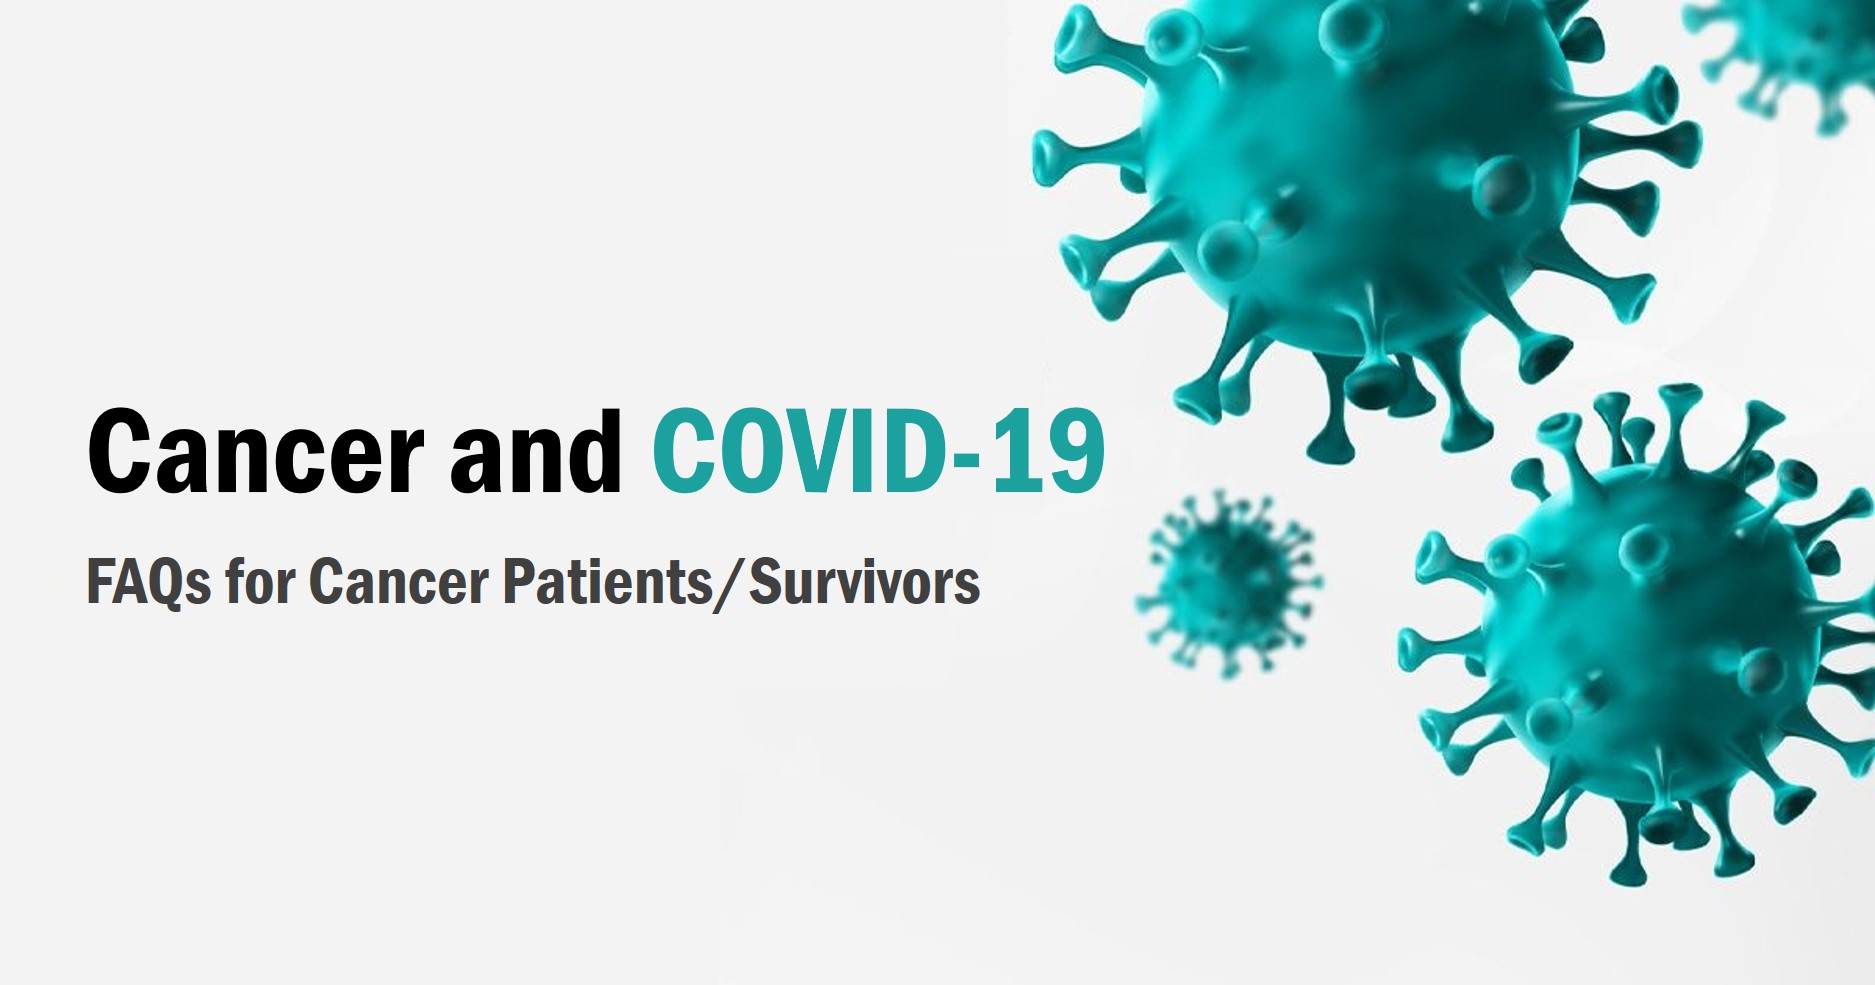 Questions About Cancer and COVID-19 for Patients and Cancer Survivors